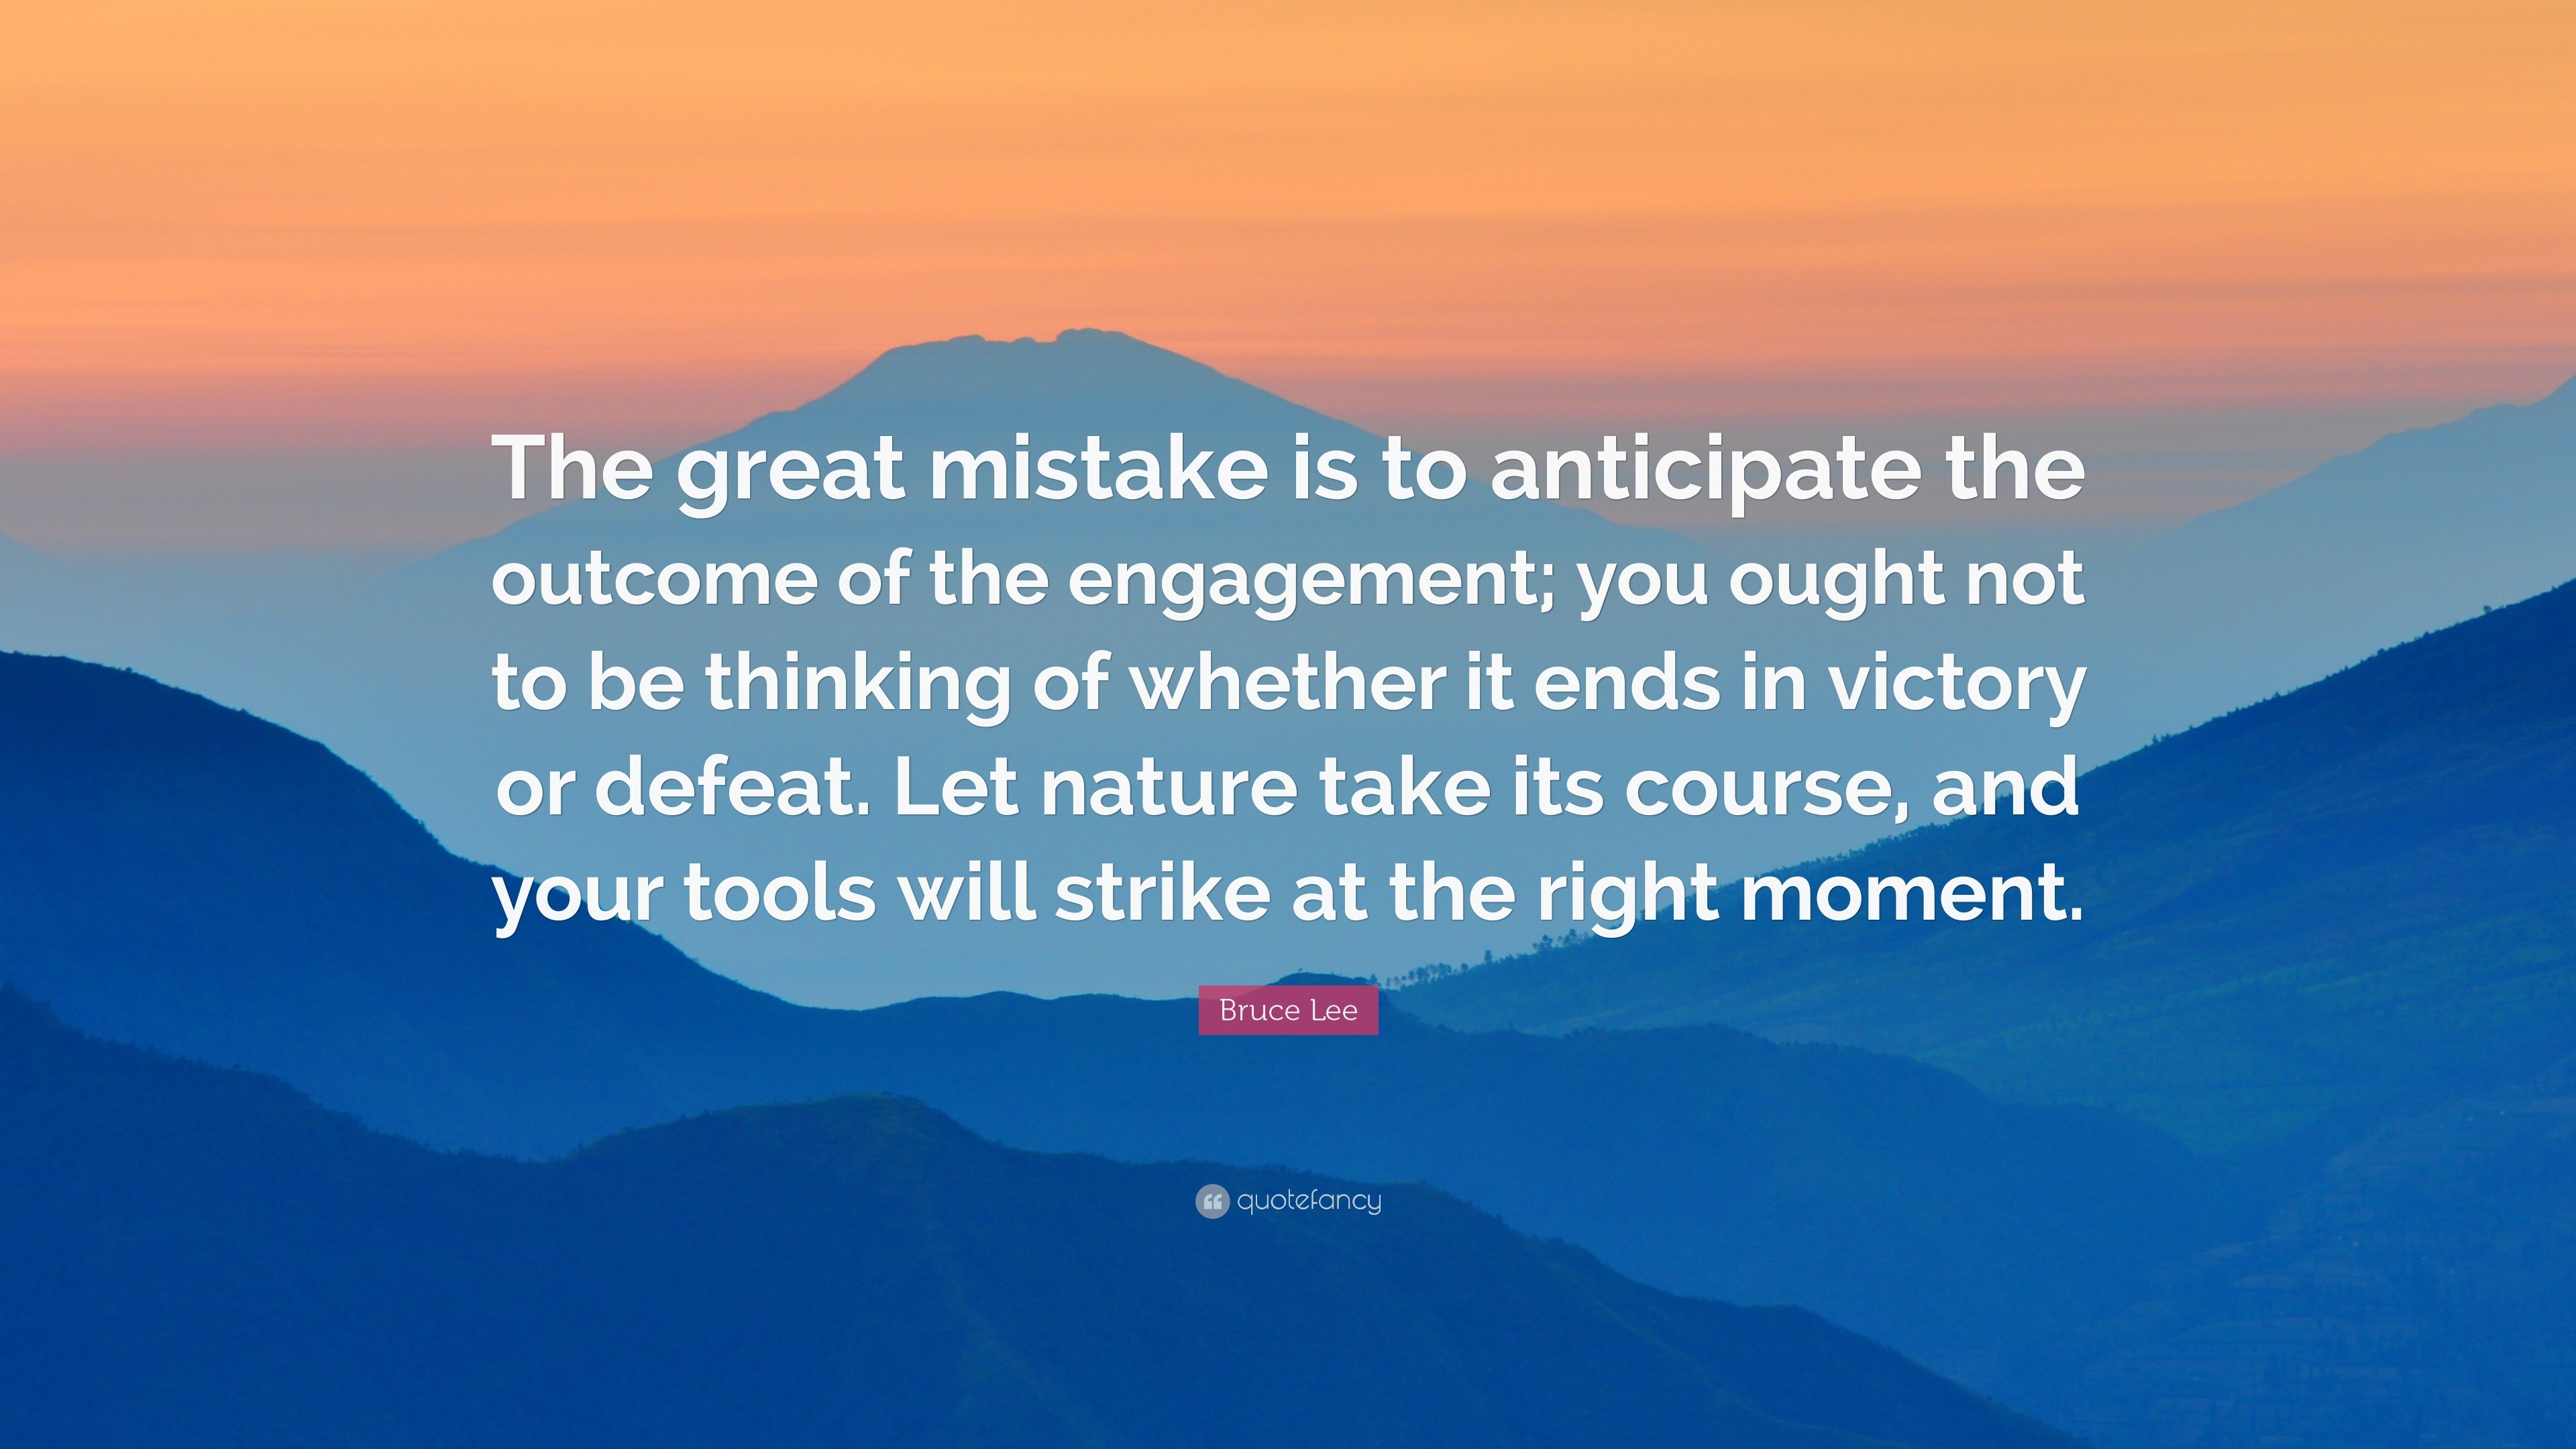 Lee Quote: “The great mistake is to anticipate the outcome of the engagement; you ought not to be thinking of whether it ends in vic...”